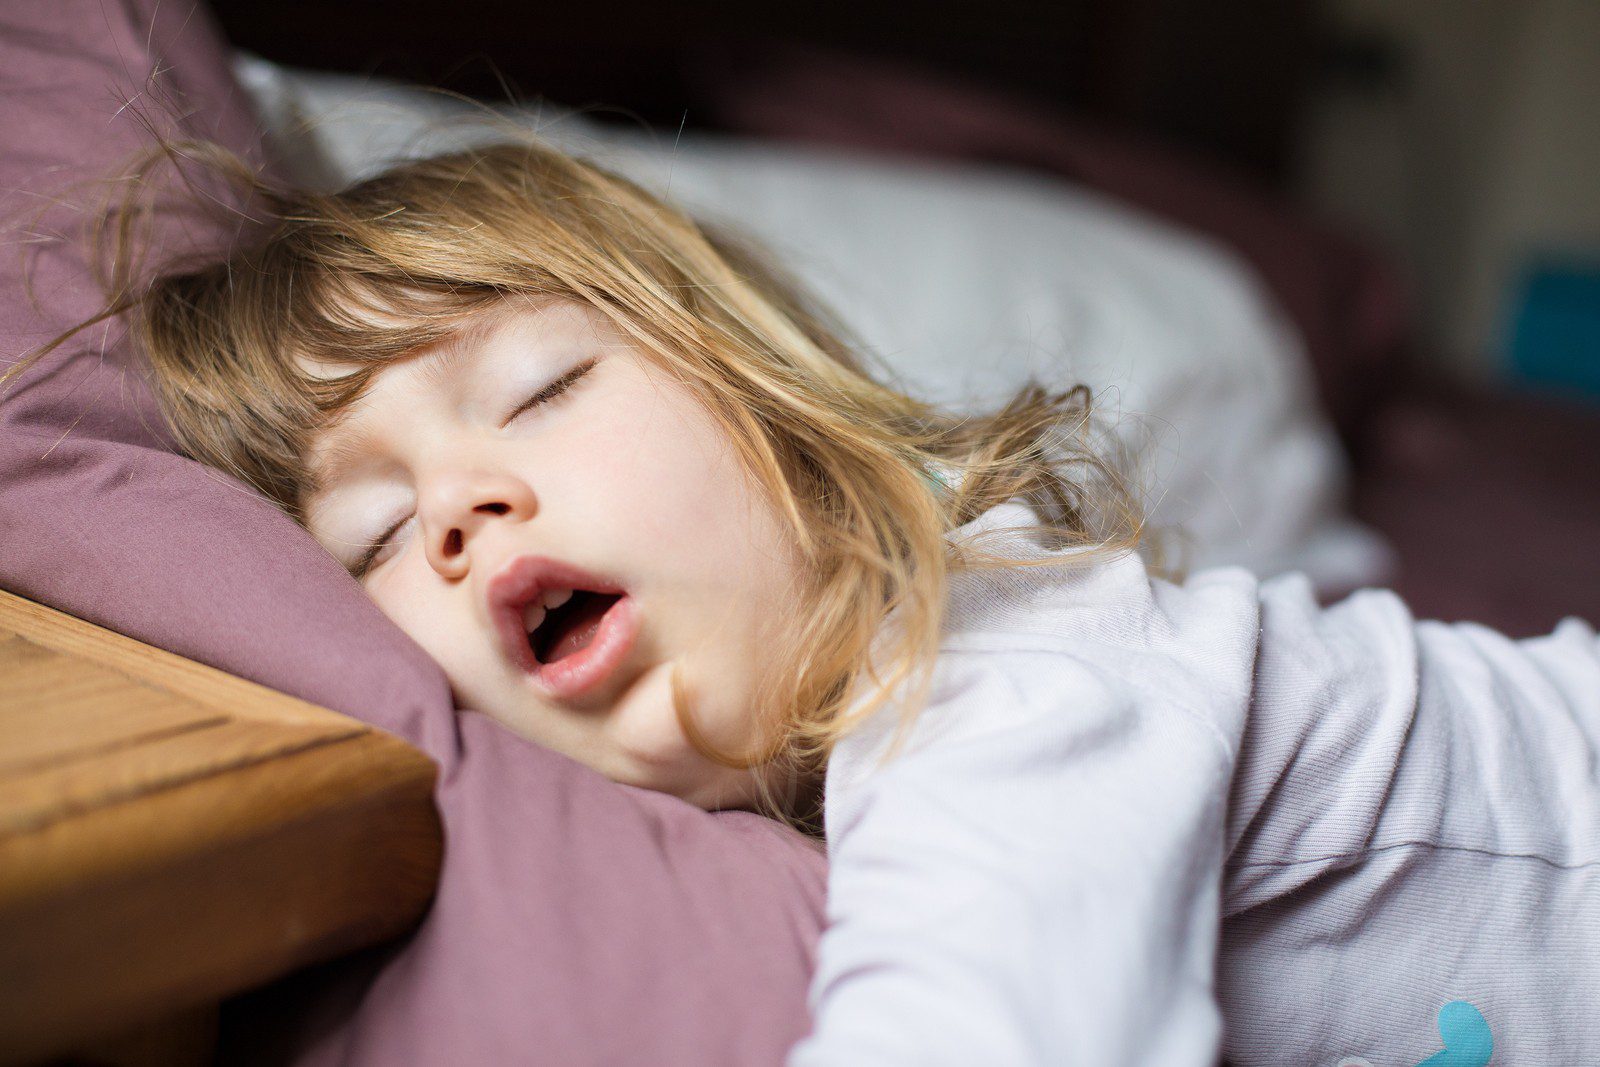 Keeping Your Kids Well-Rested During the Holidays